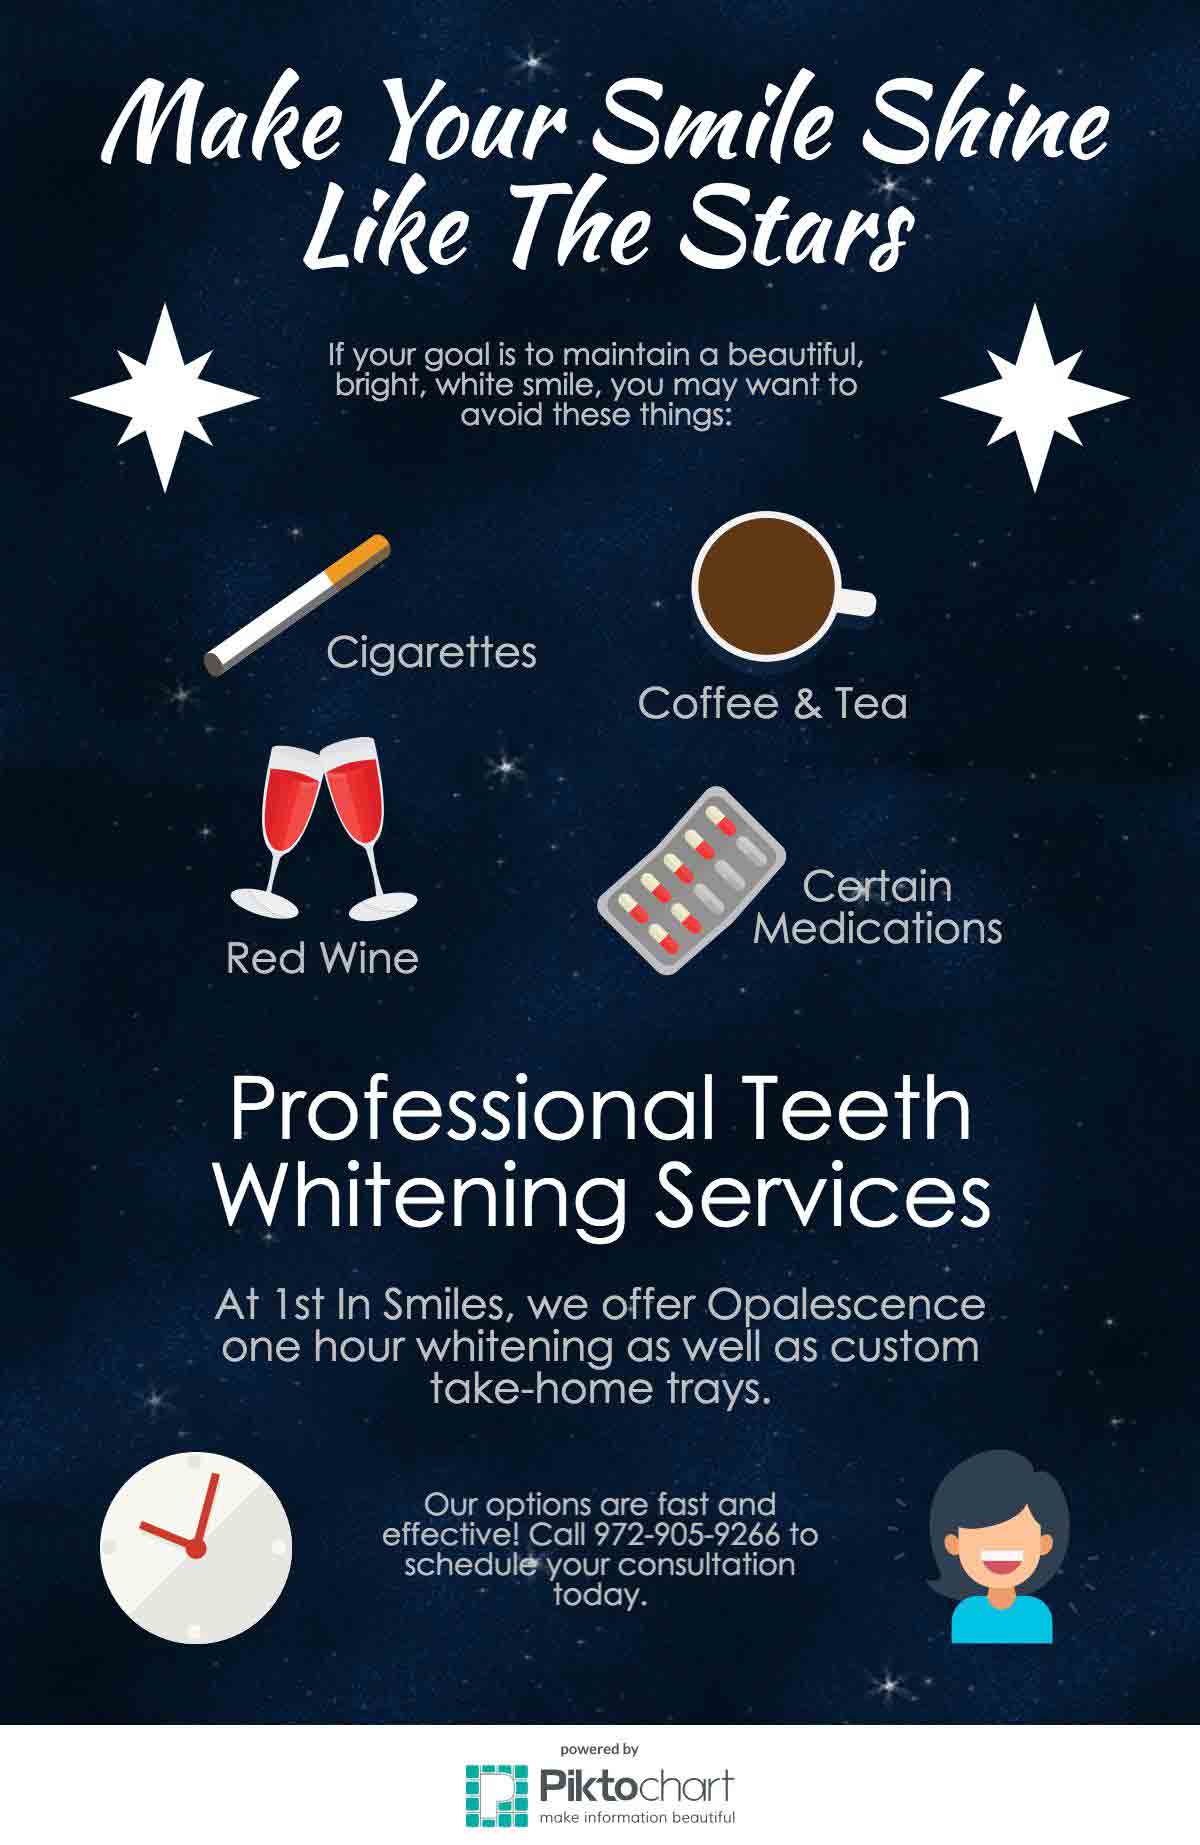 Professional teeth services